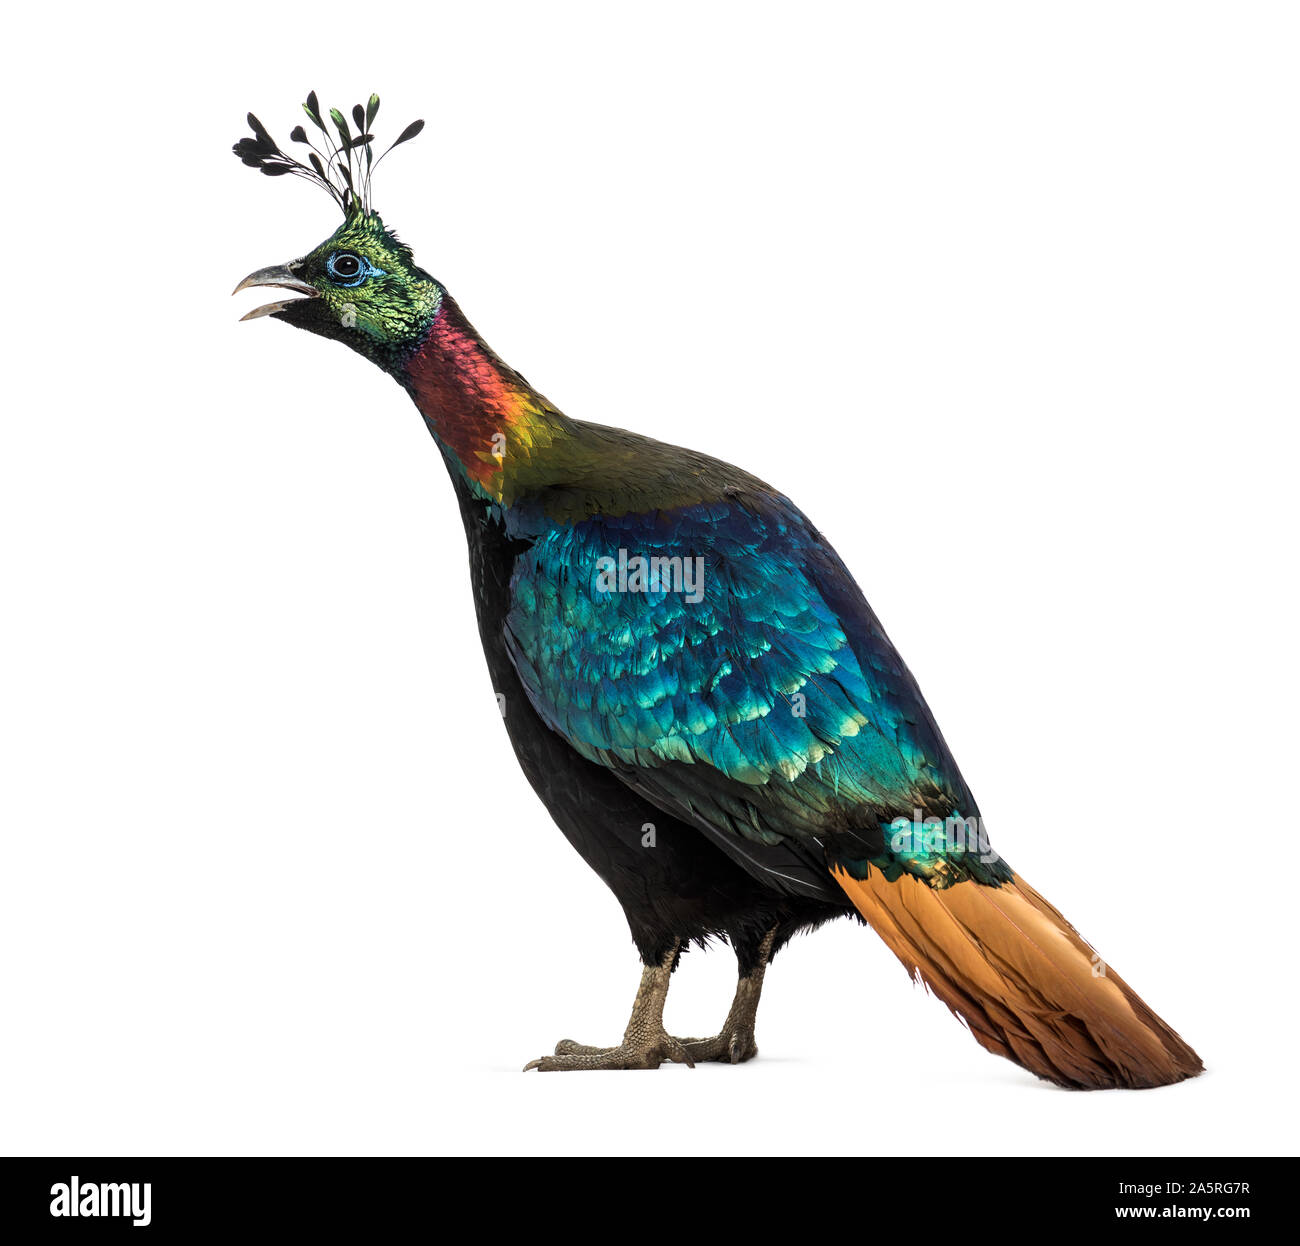 Himalayan monal, Lophophorus impejanus, also known as the Impeyan monal and Impeyan pheasant standing against white background Stock Photo